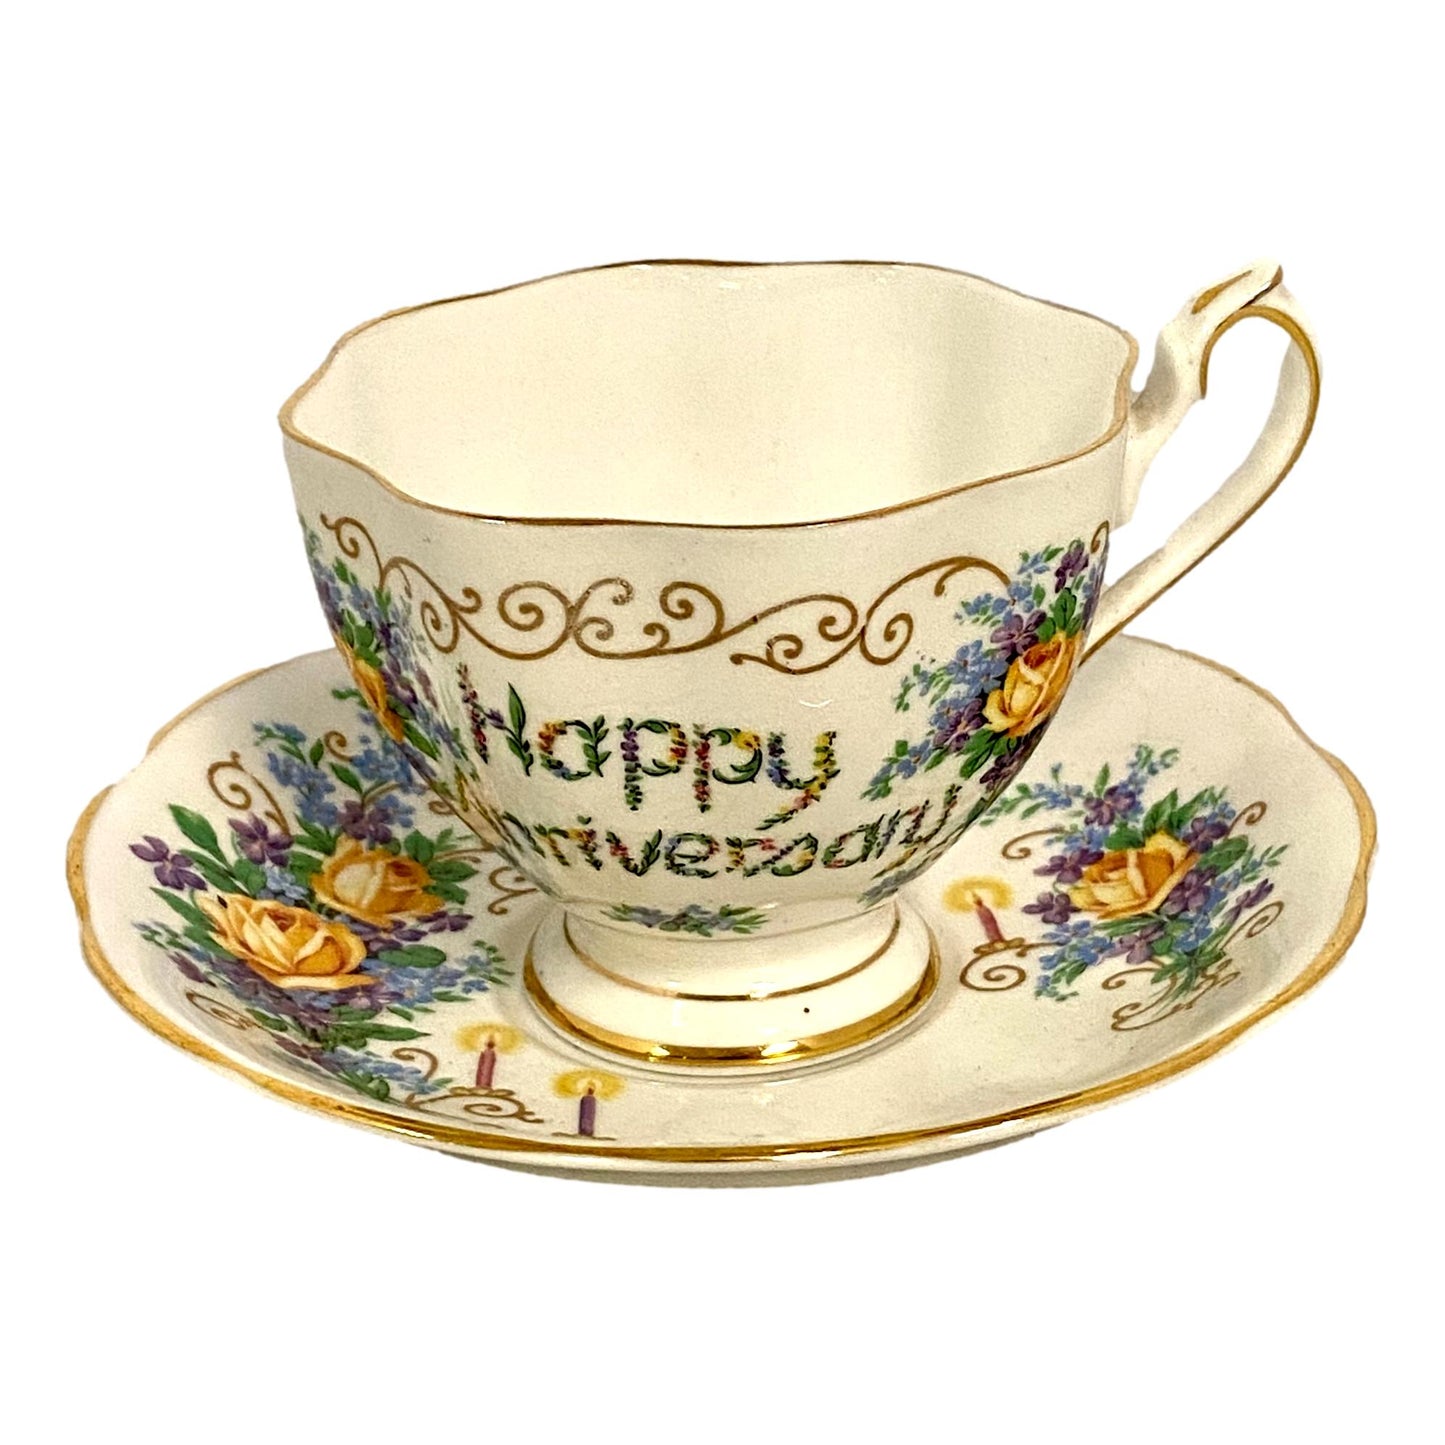 Anniversary Cup & Saucer